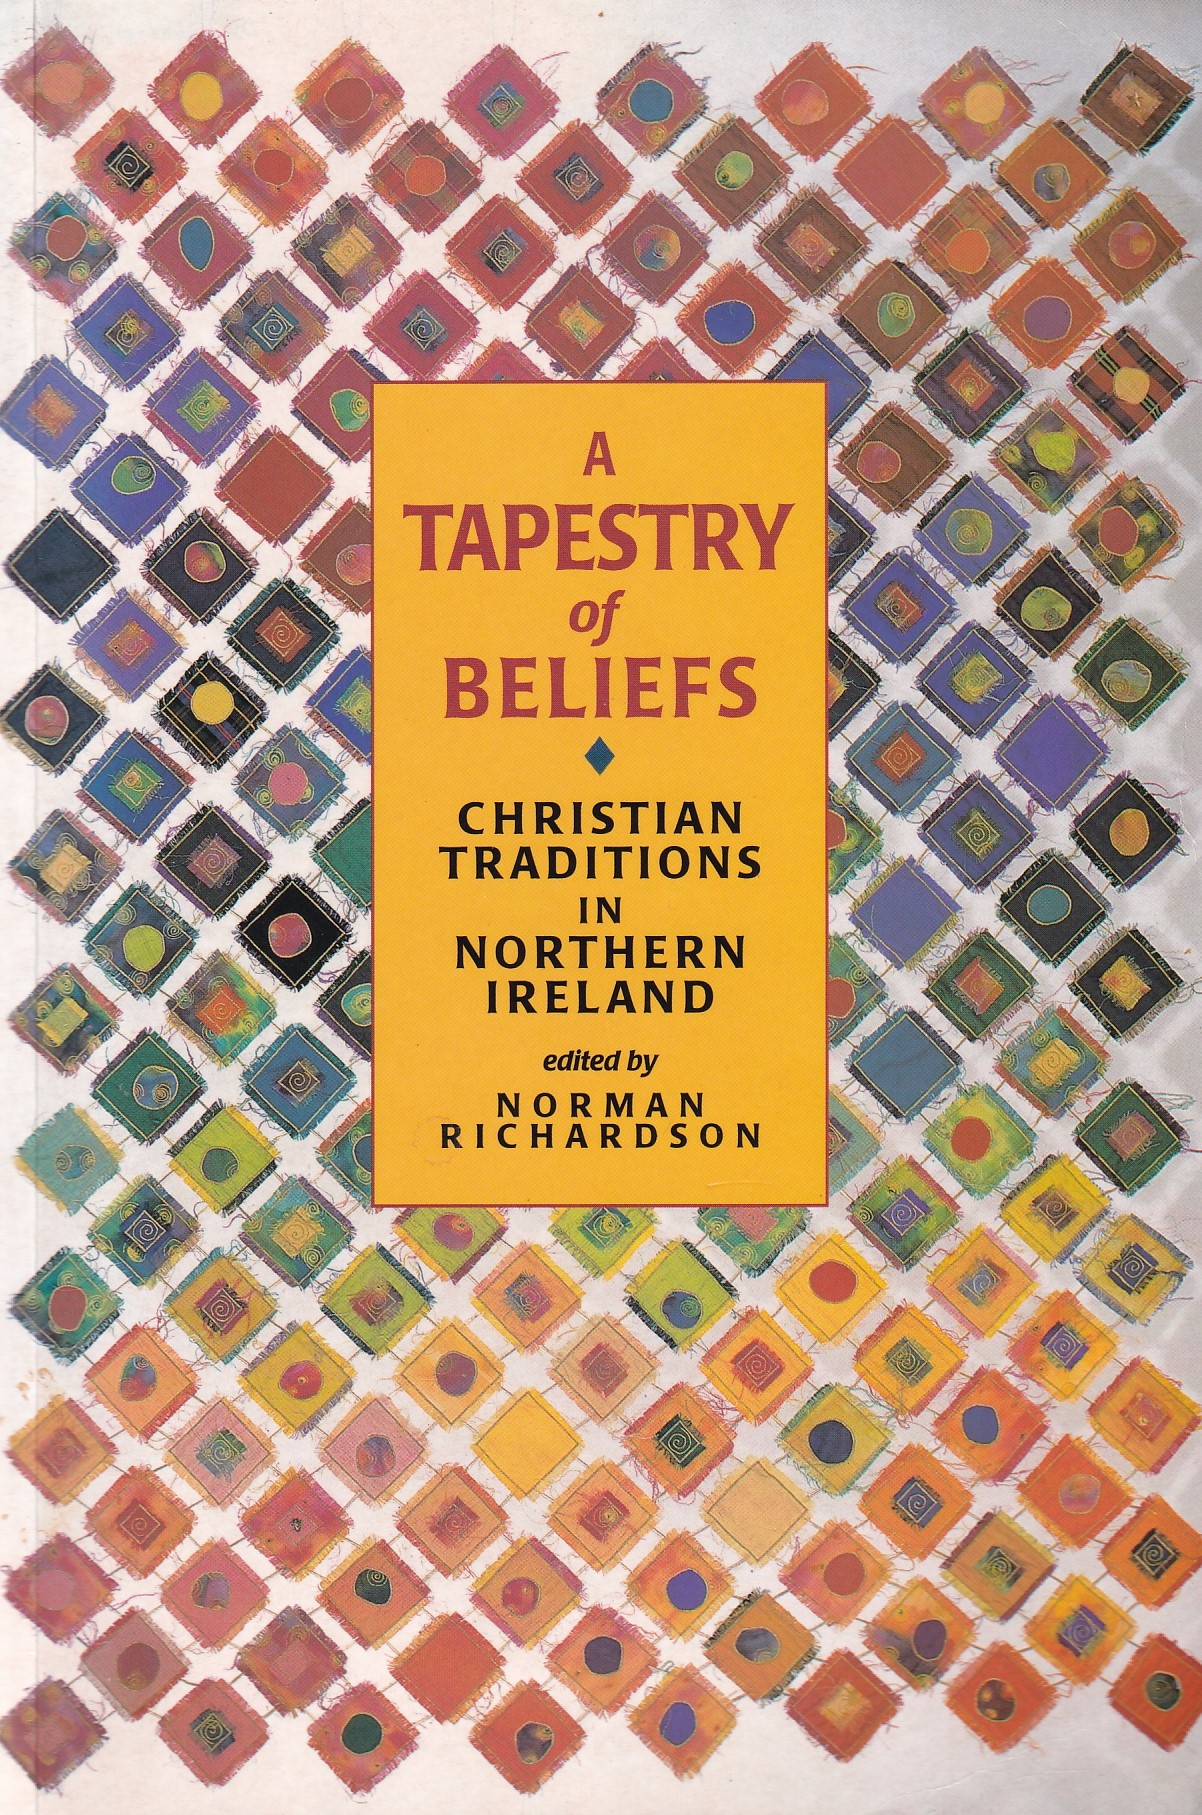 A Tapestry of Beliefs: Christian Traditions in Northern Ireland | Norman Richardson (ed.) | Charlie Byrne's